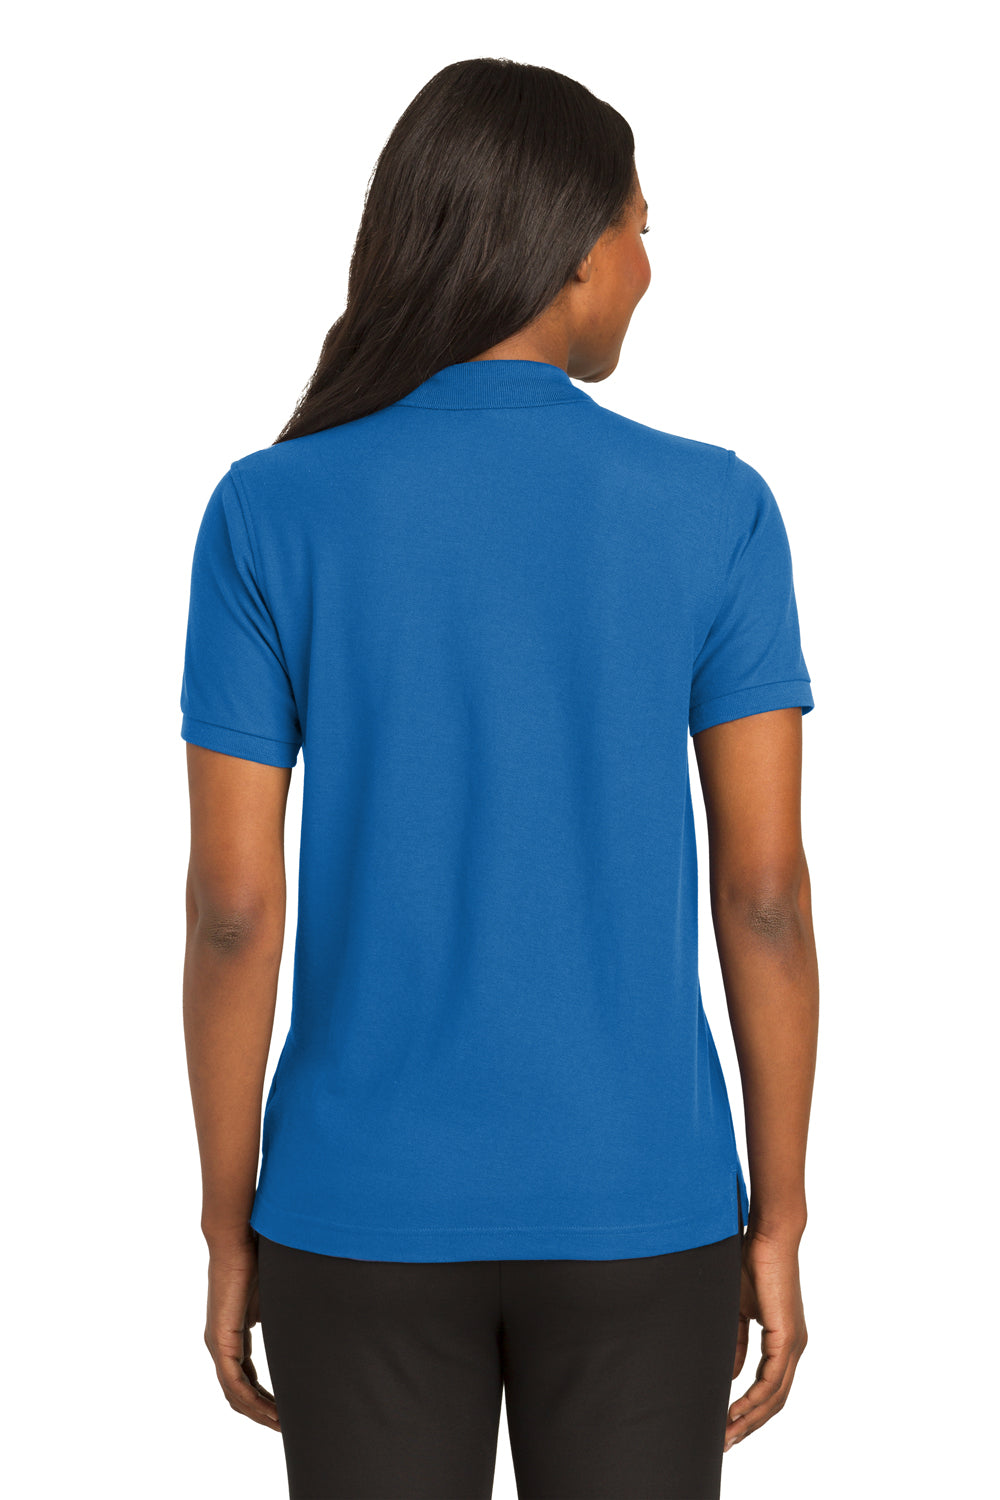 Port Authority L500 Womens Silk Touch Wrinkle Resistant Short Sleeve Polo Shirt Strong Blue Back